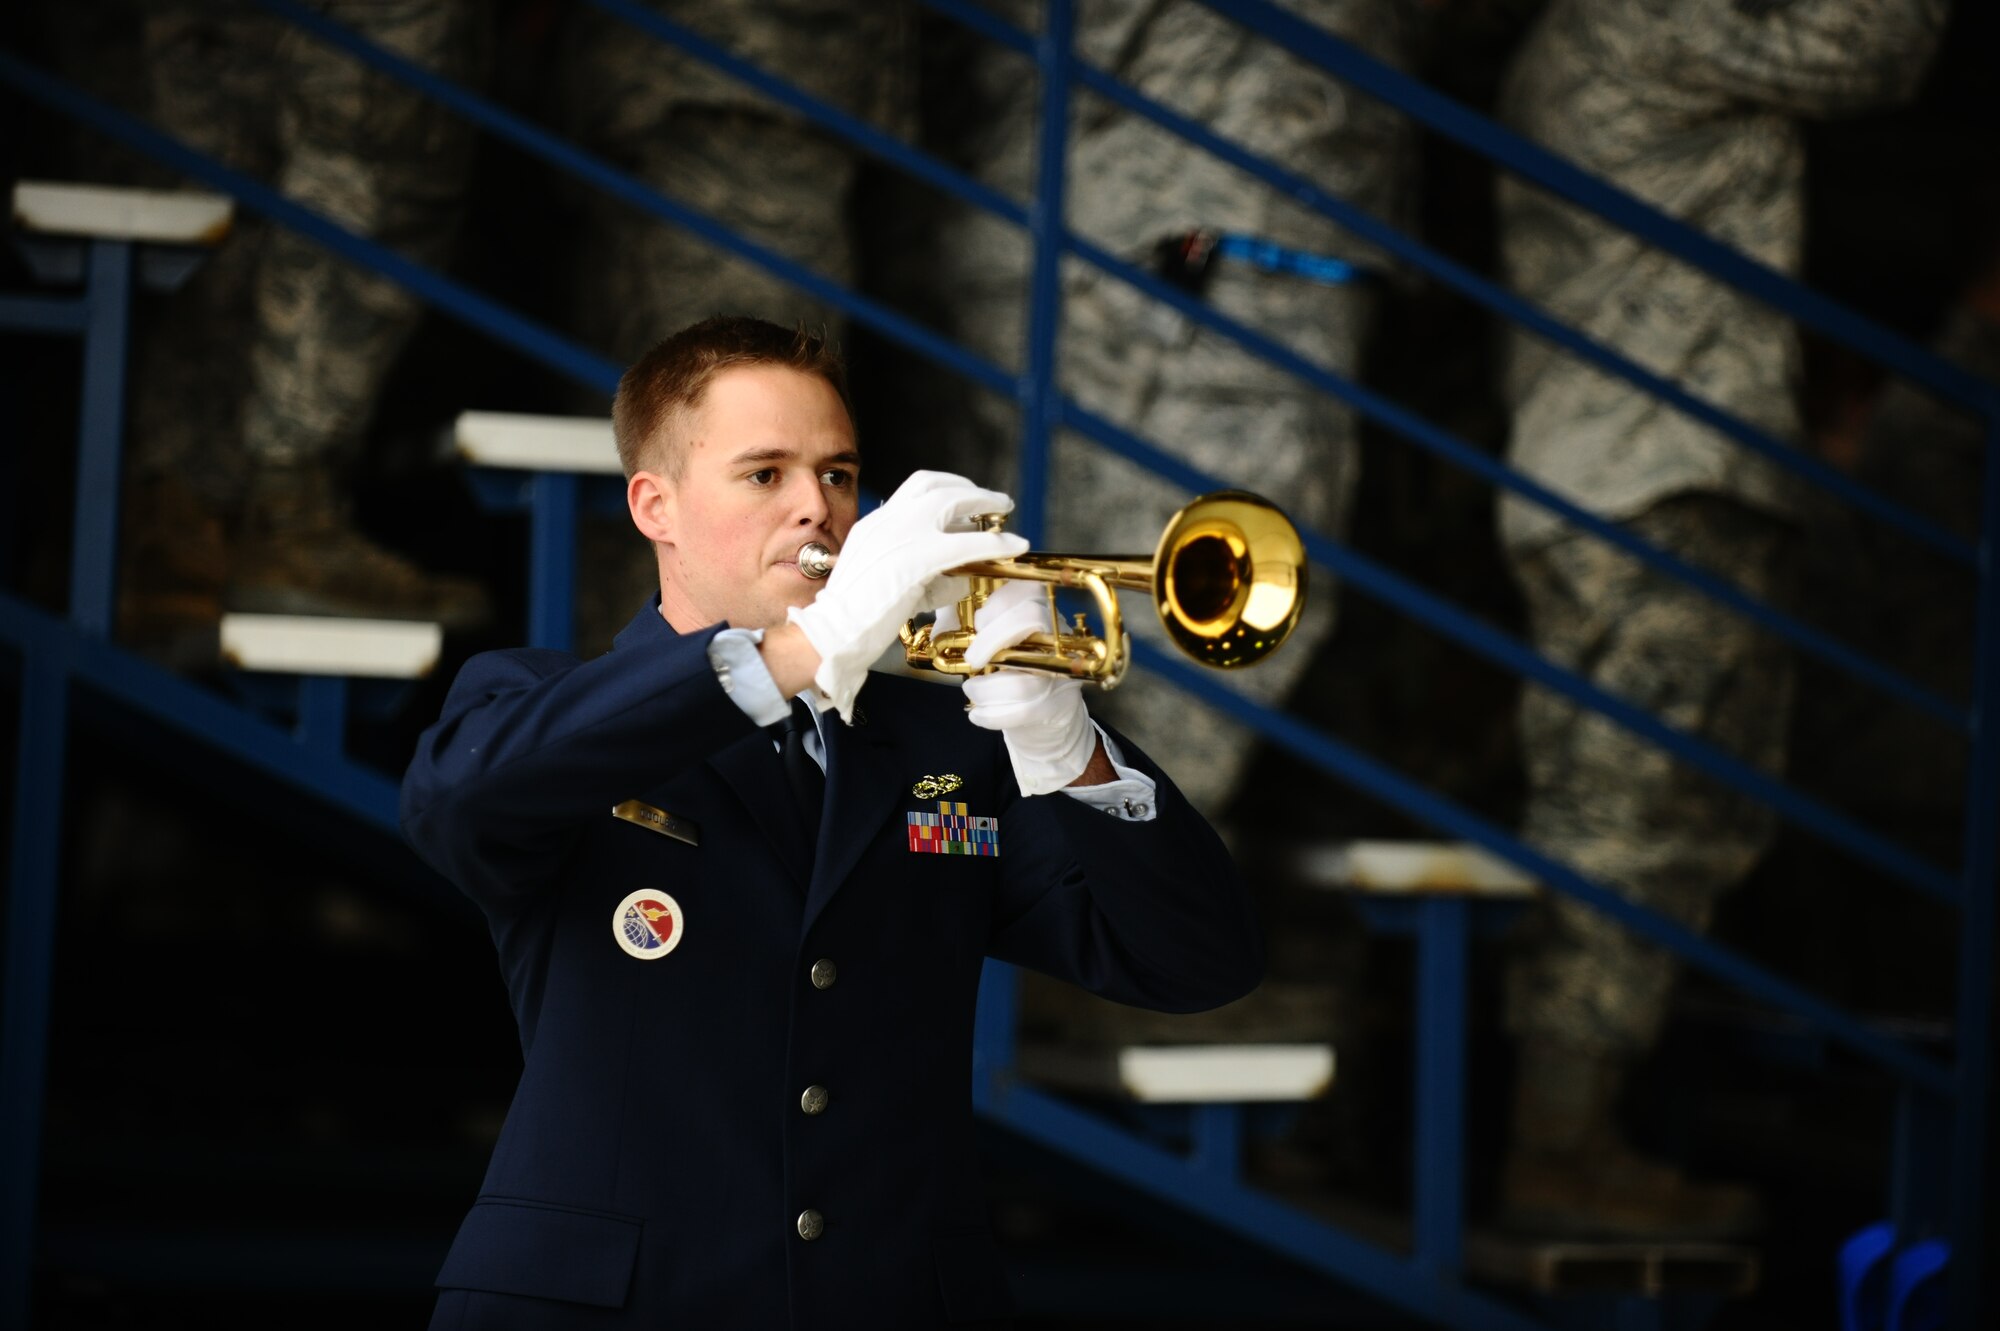 SPANGDAHLEM AIR BASE, Germany – Tech. Sgt. Nicholas Cooley, 52nd Force Support Squadron, performs Taps on his trumpet during the memorial service for Staff Sgt. Joseph J. Hamski, 52nd Civil Engineer Squadron Explosive Ordnance Disposal Flight, held here June 16. Sergeant Hamski was killed in action May 26, 2011, in Shorabak, Afghanistan, while responding to a known enemy weapons cache. (U.S. Air Force photo/Senior Airman Nathanael Callon)